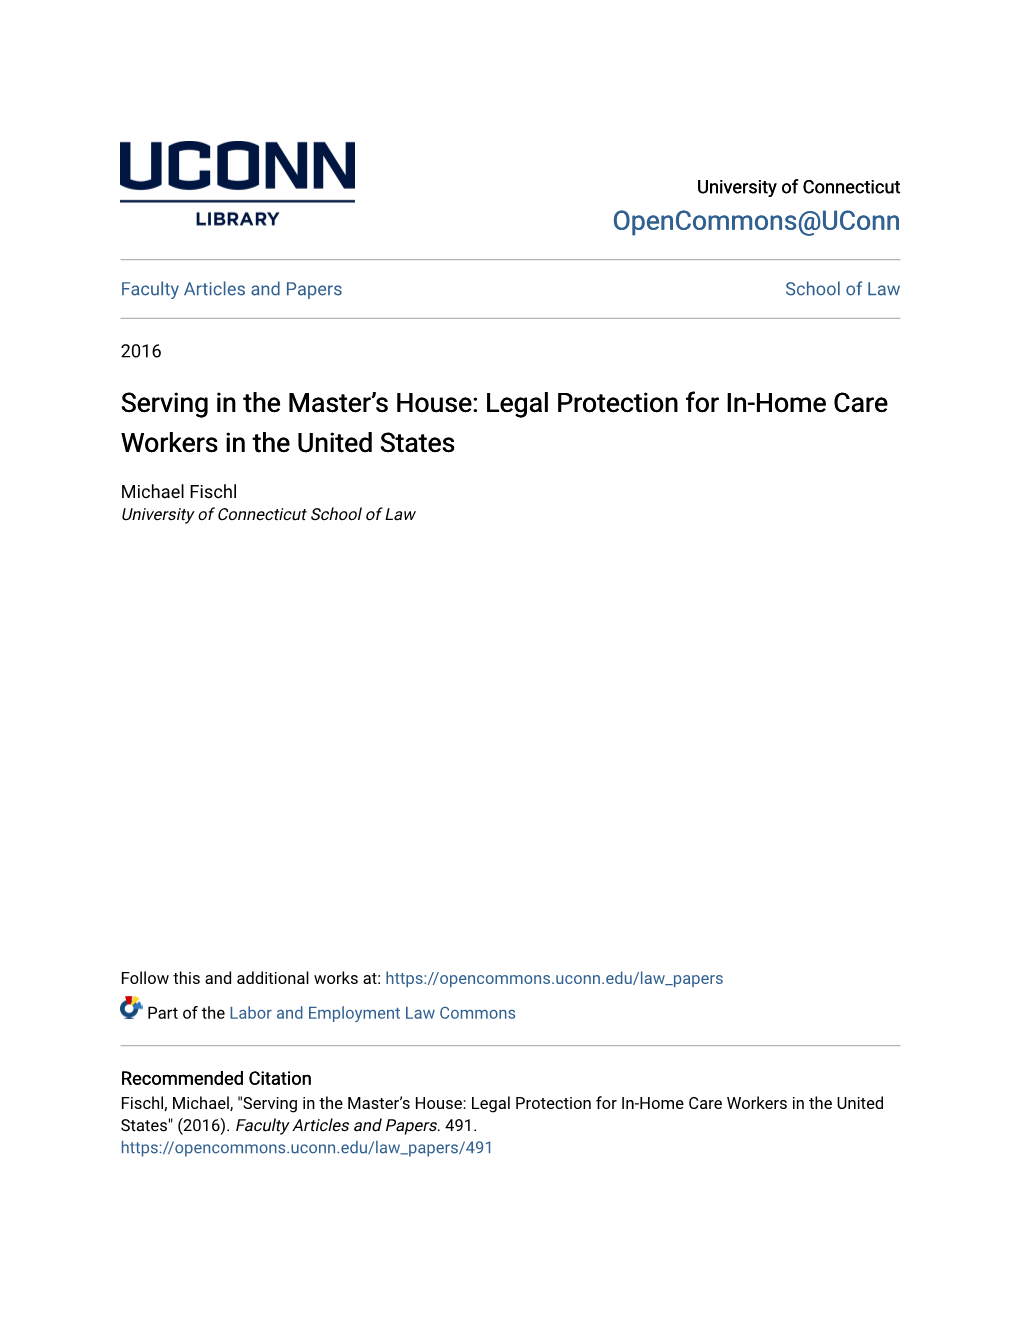 Legal Protection for In-Home Care Workers in the United States